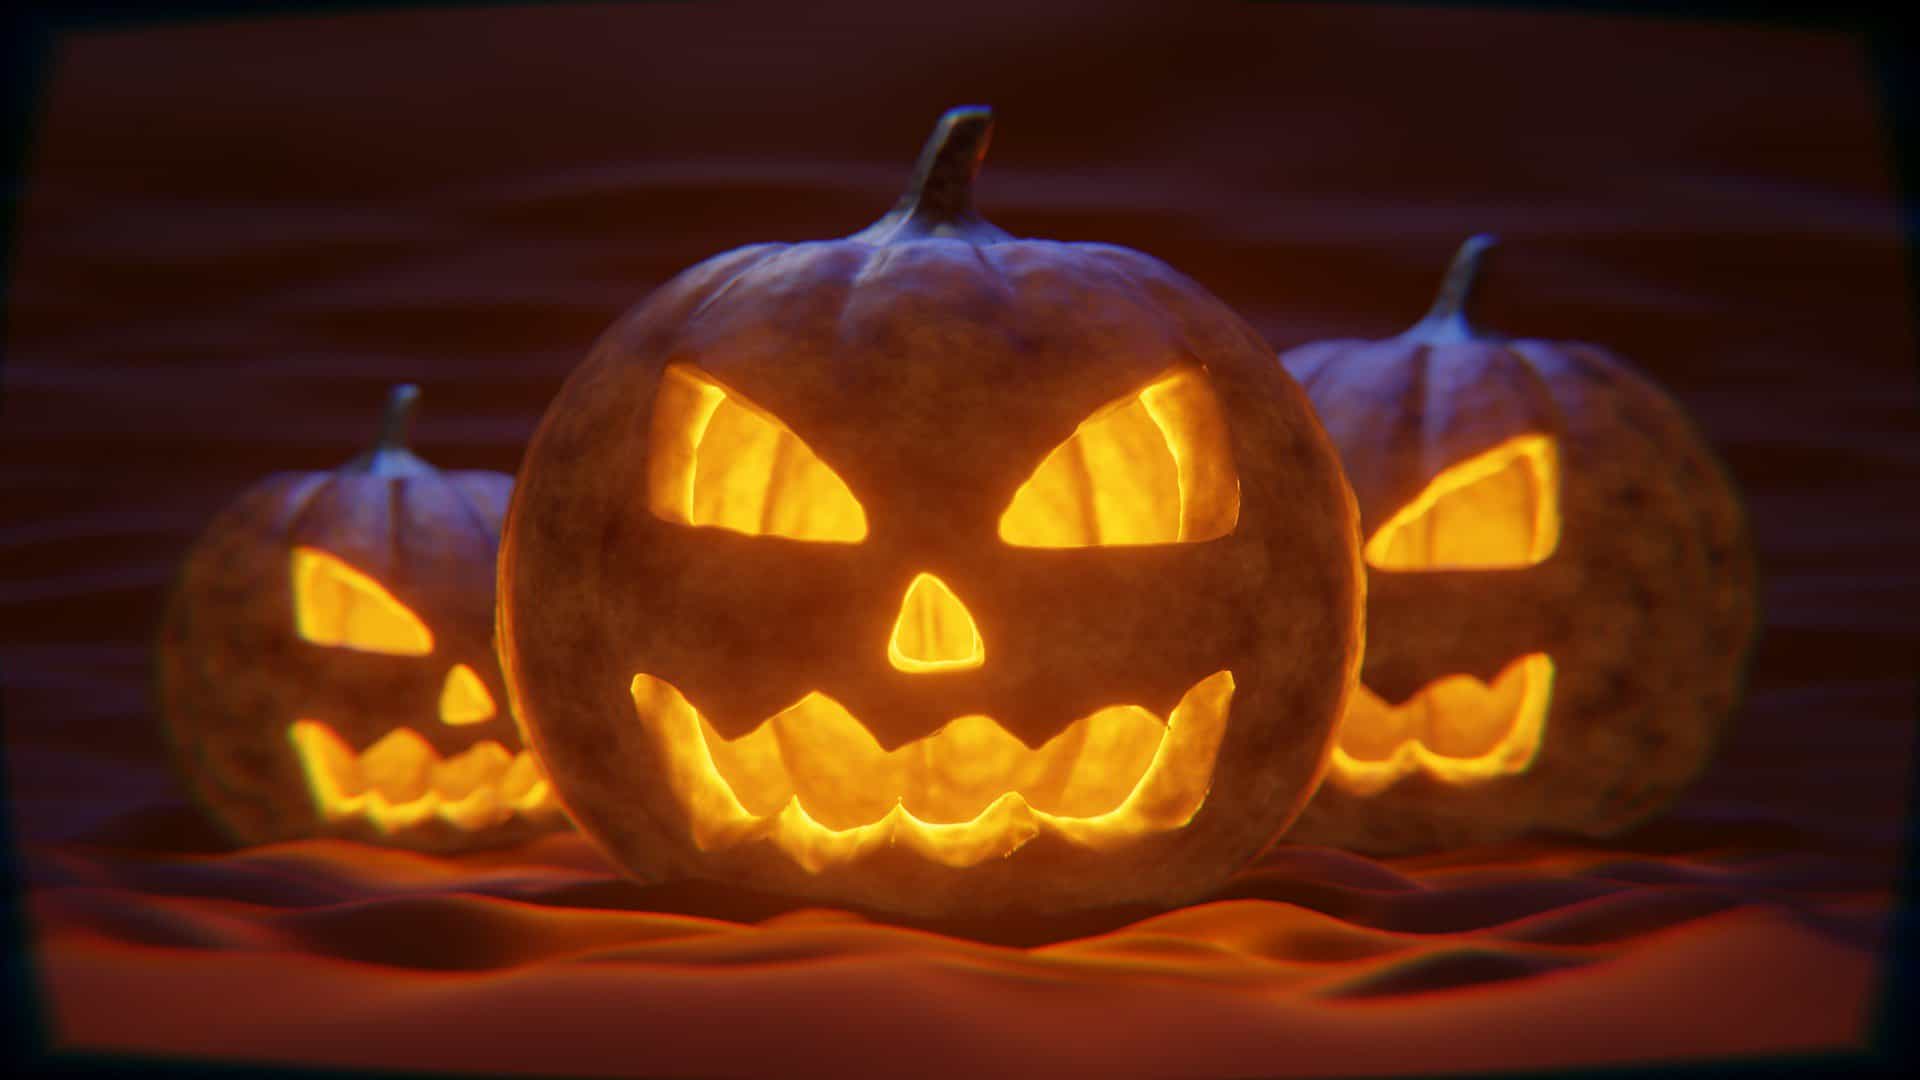 Three carved pumpkins, jack-o'-lanterns, in the dark with light emanating